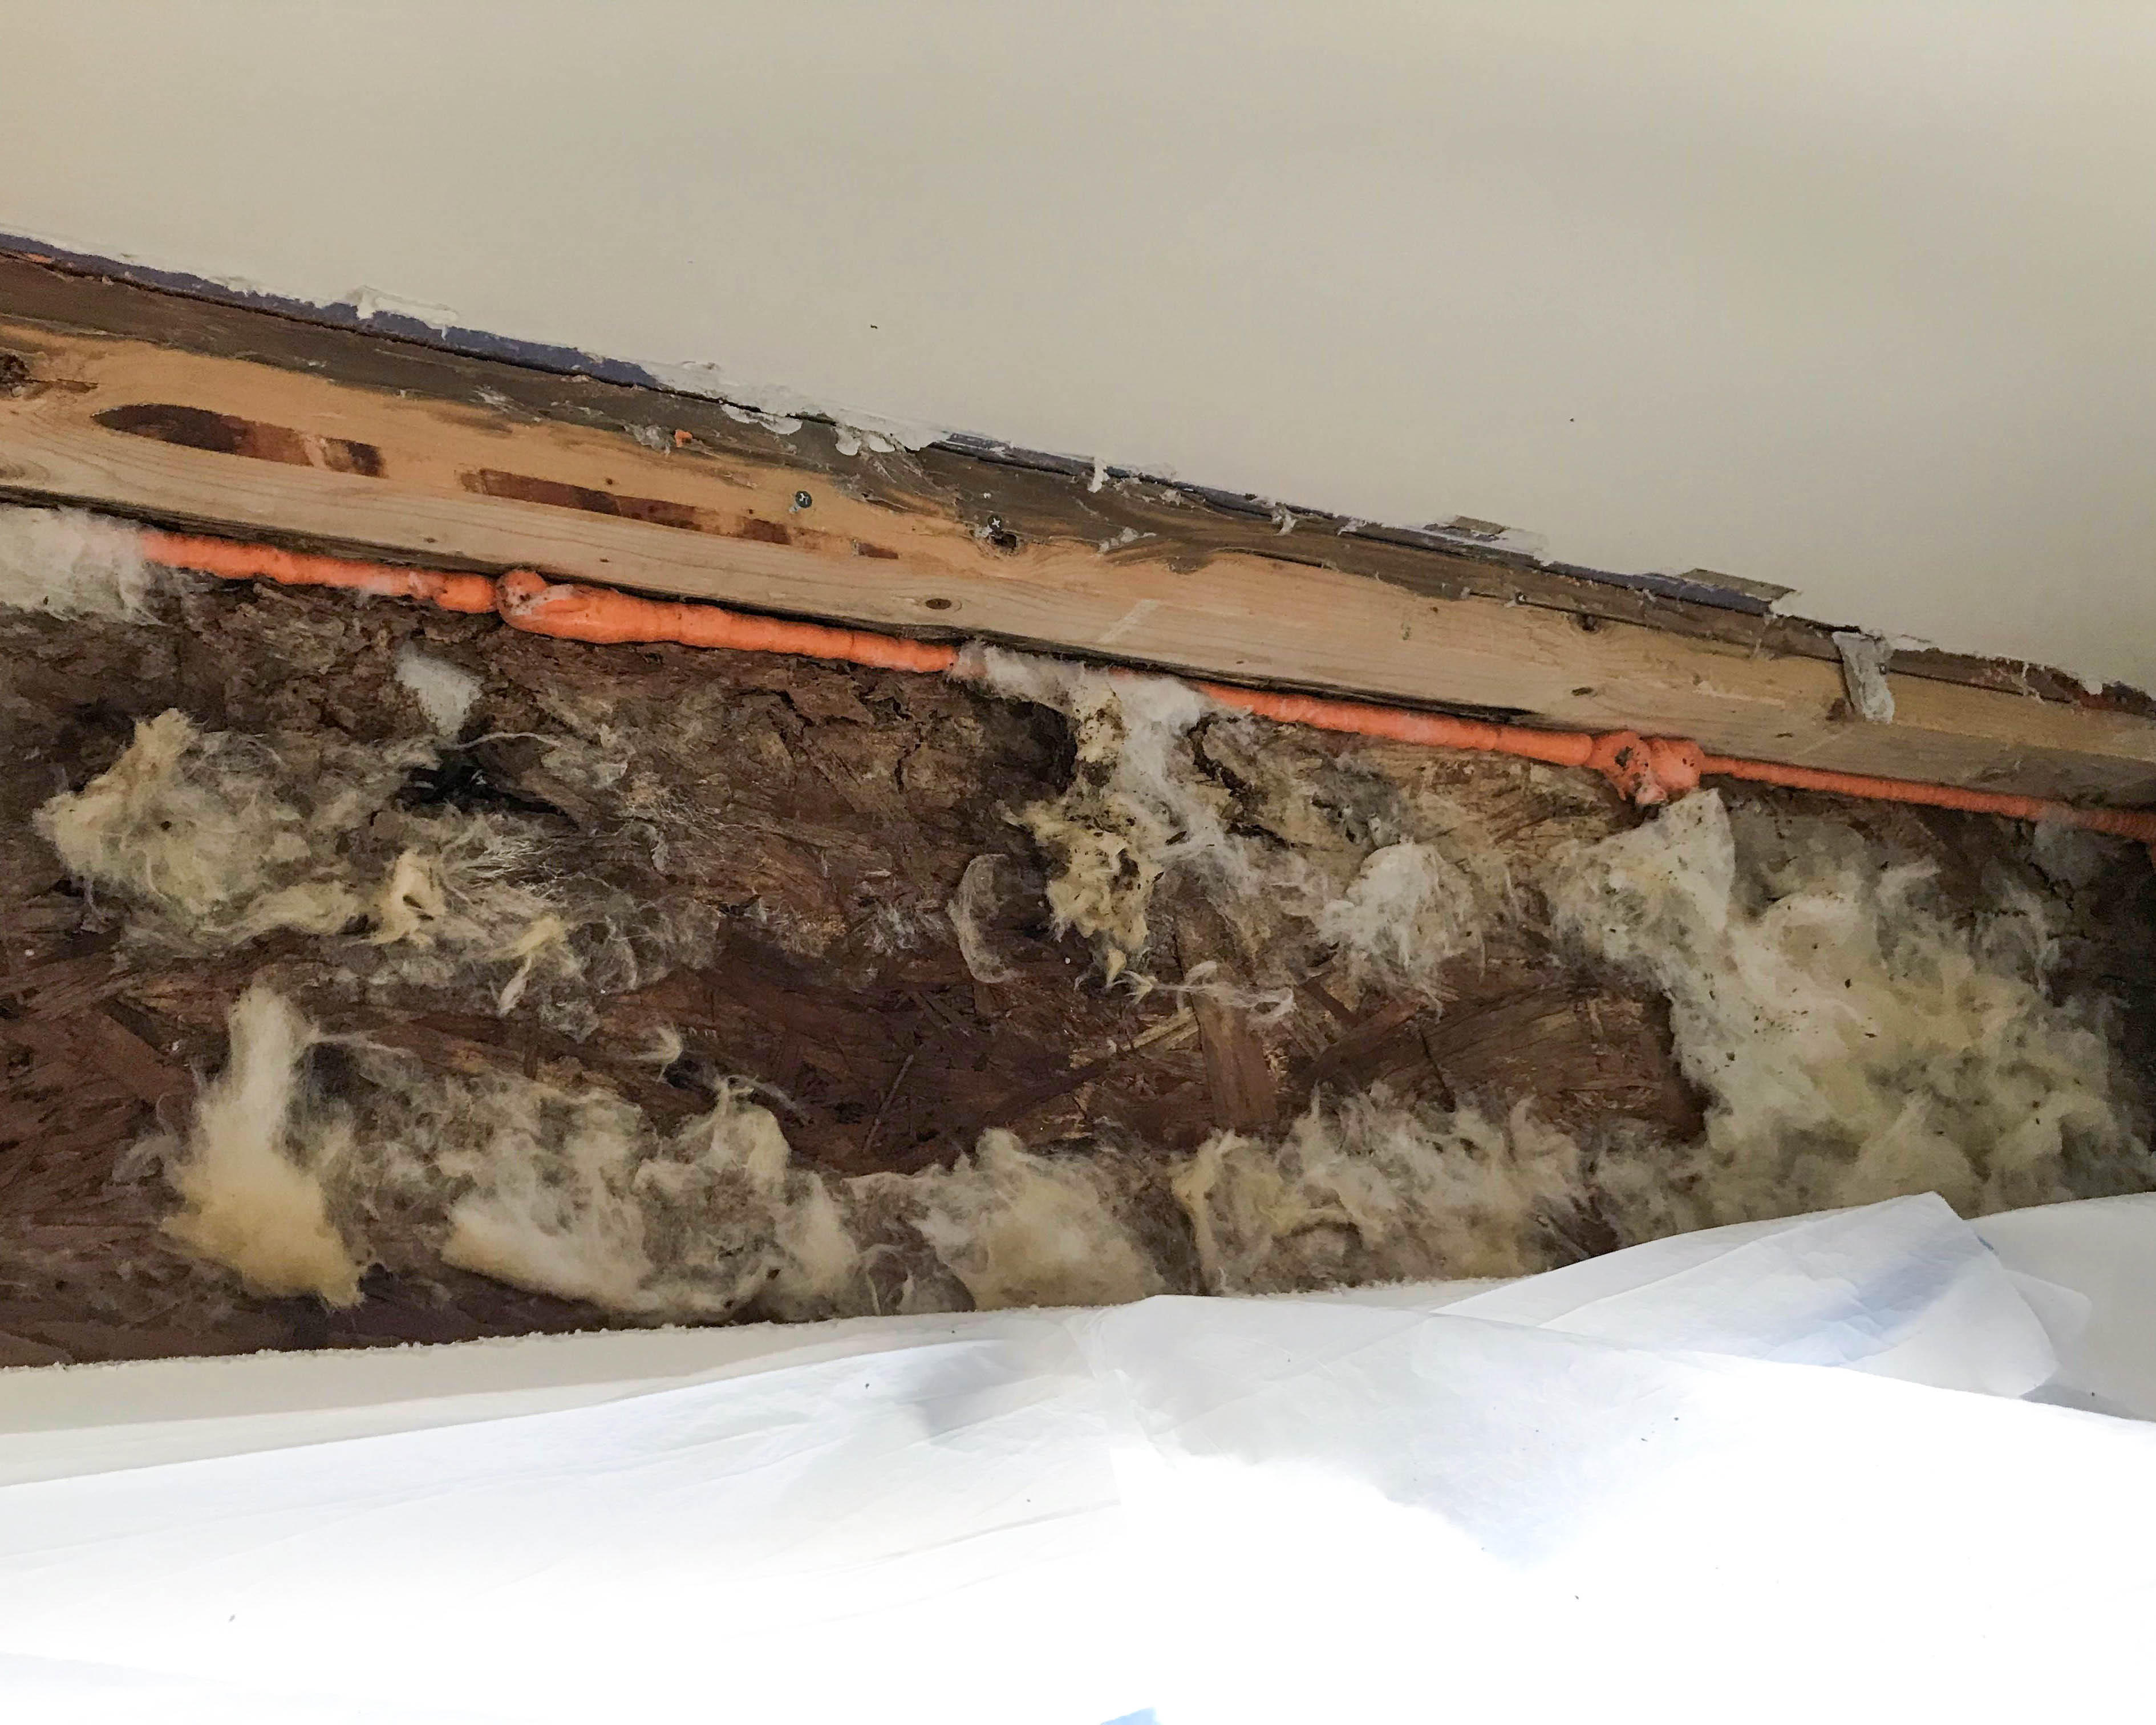 Black mold, white mold, fuzzy mold!! It all has to go, and that's why you need SERVPRO of North East Chester County to get the job done.